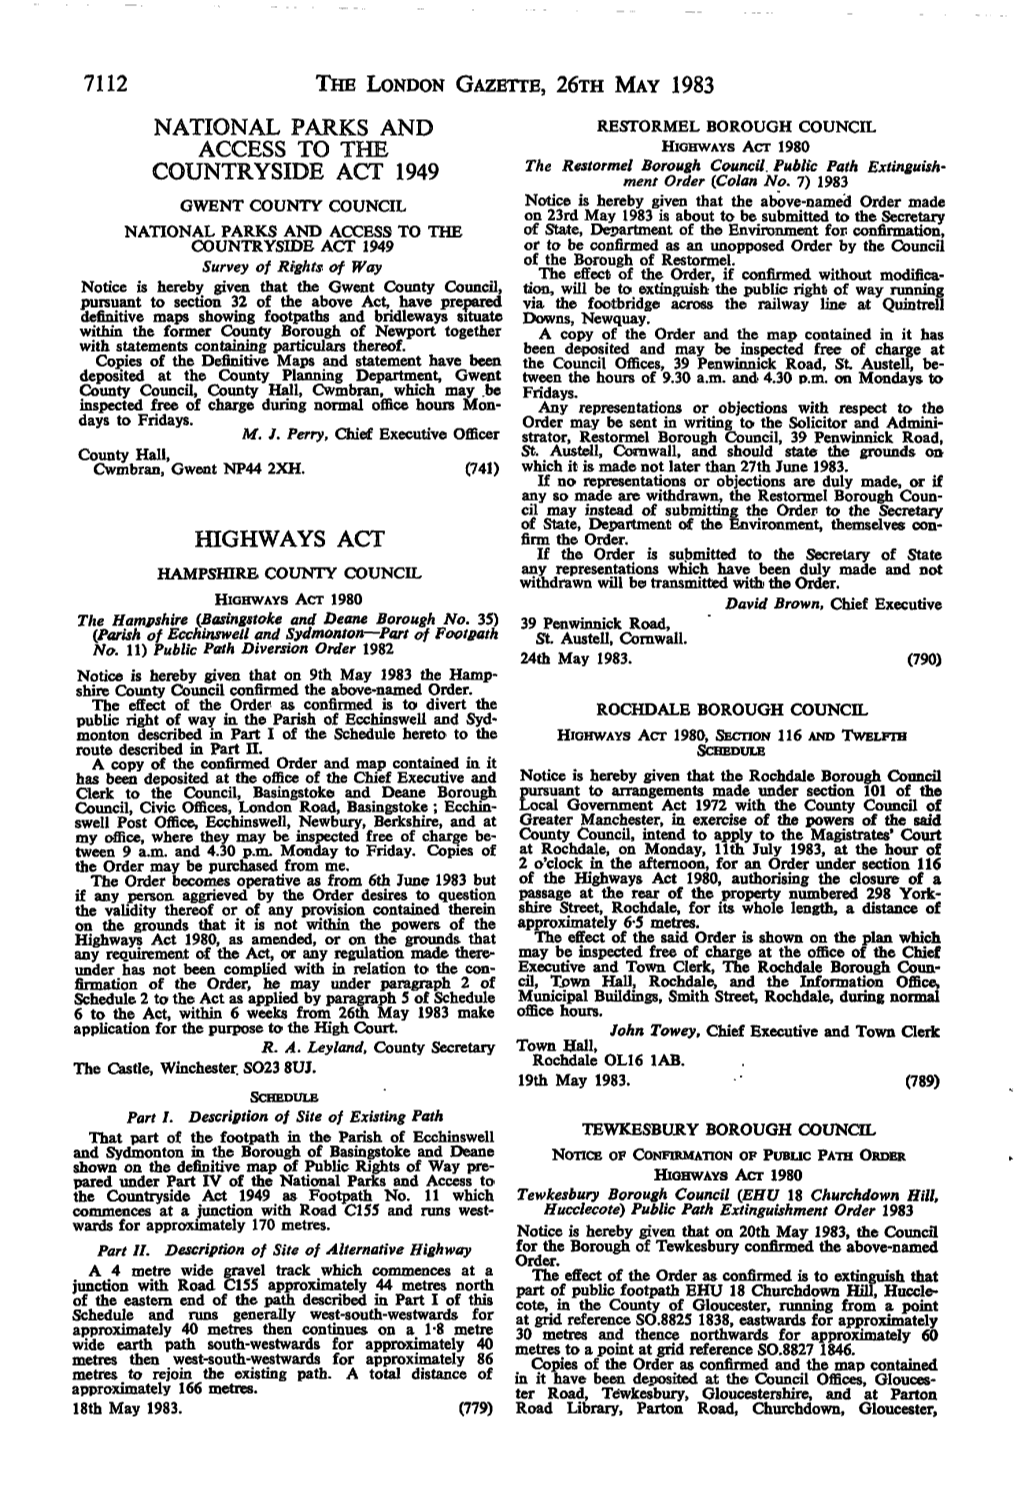 THE LONDON GAZETTE, 26Ra MAY 1983 NATIONAL PARKS and RESTORMEL BOROUGH COUNCIL ACCESS to the HIGHWAYS ACT 1980 the Restormel Borough Council